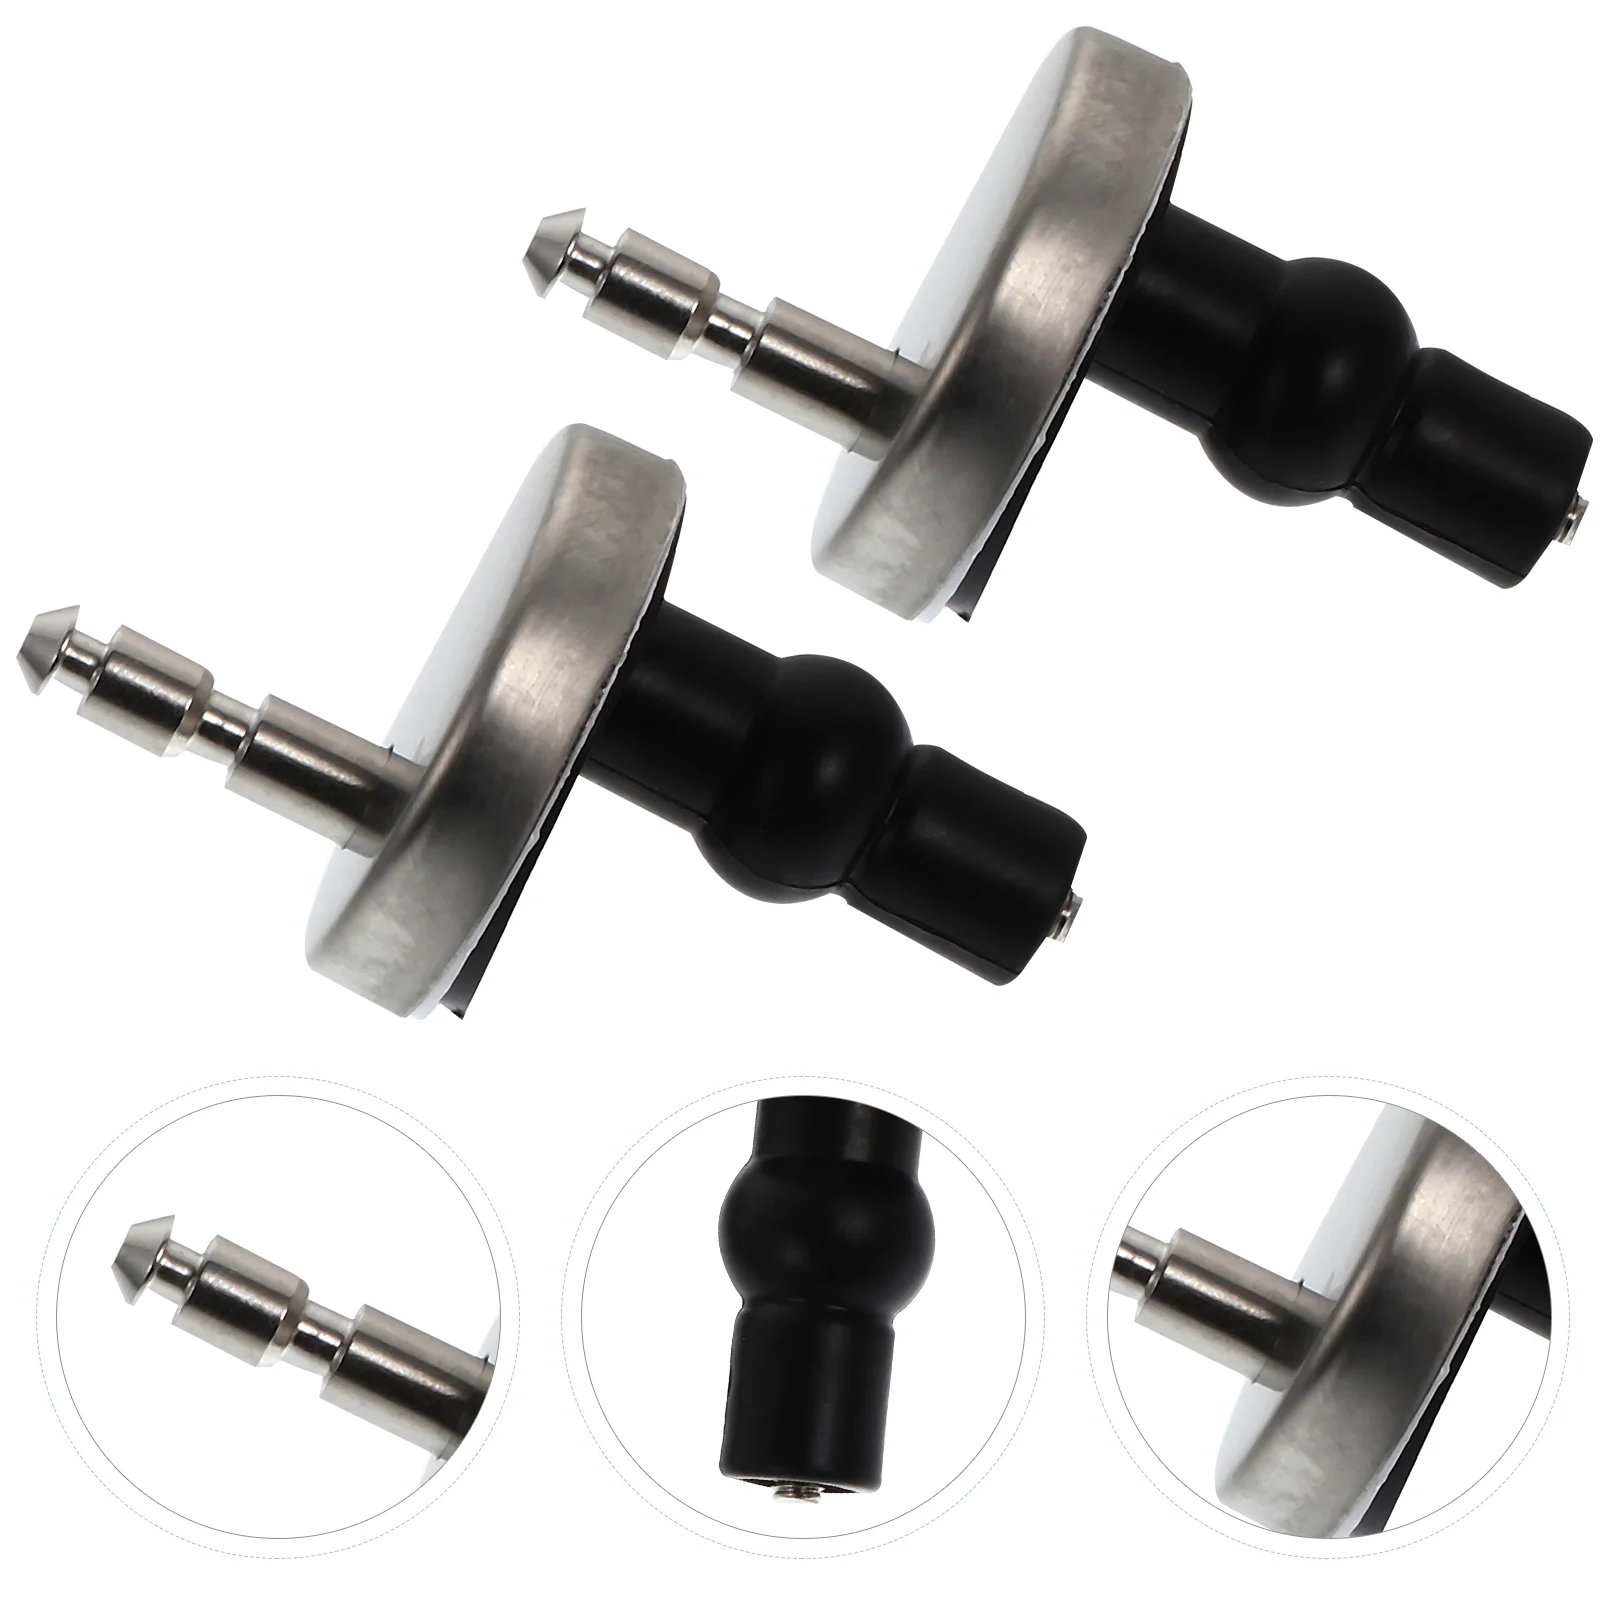 

Toilet Connector Universal Fasteners Seat Fixing Hinges Heated Kit Nut Lid Accessories Stainless Steel Quick Release